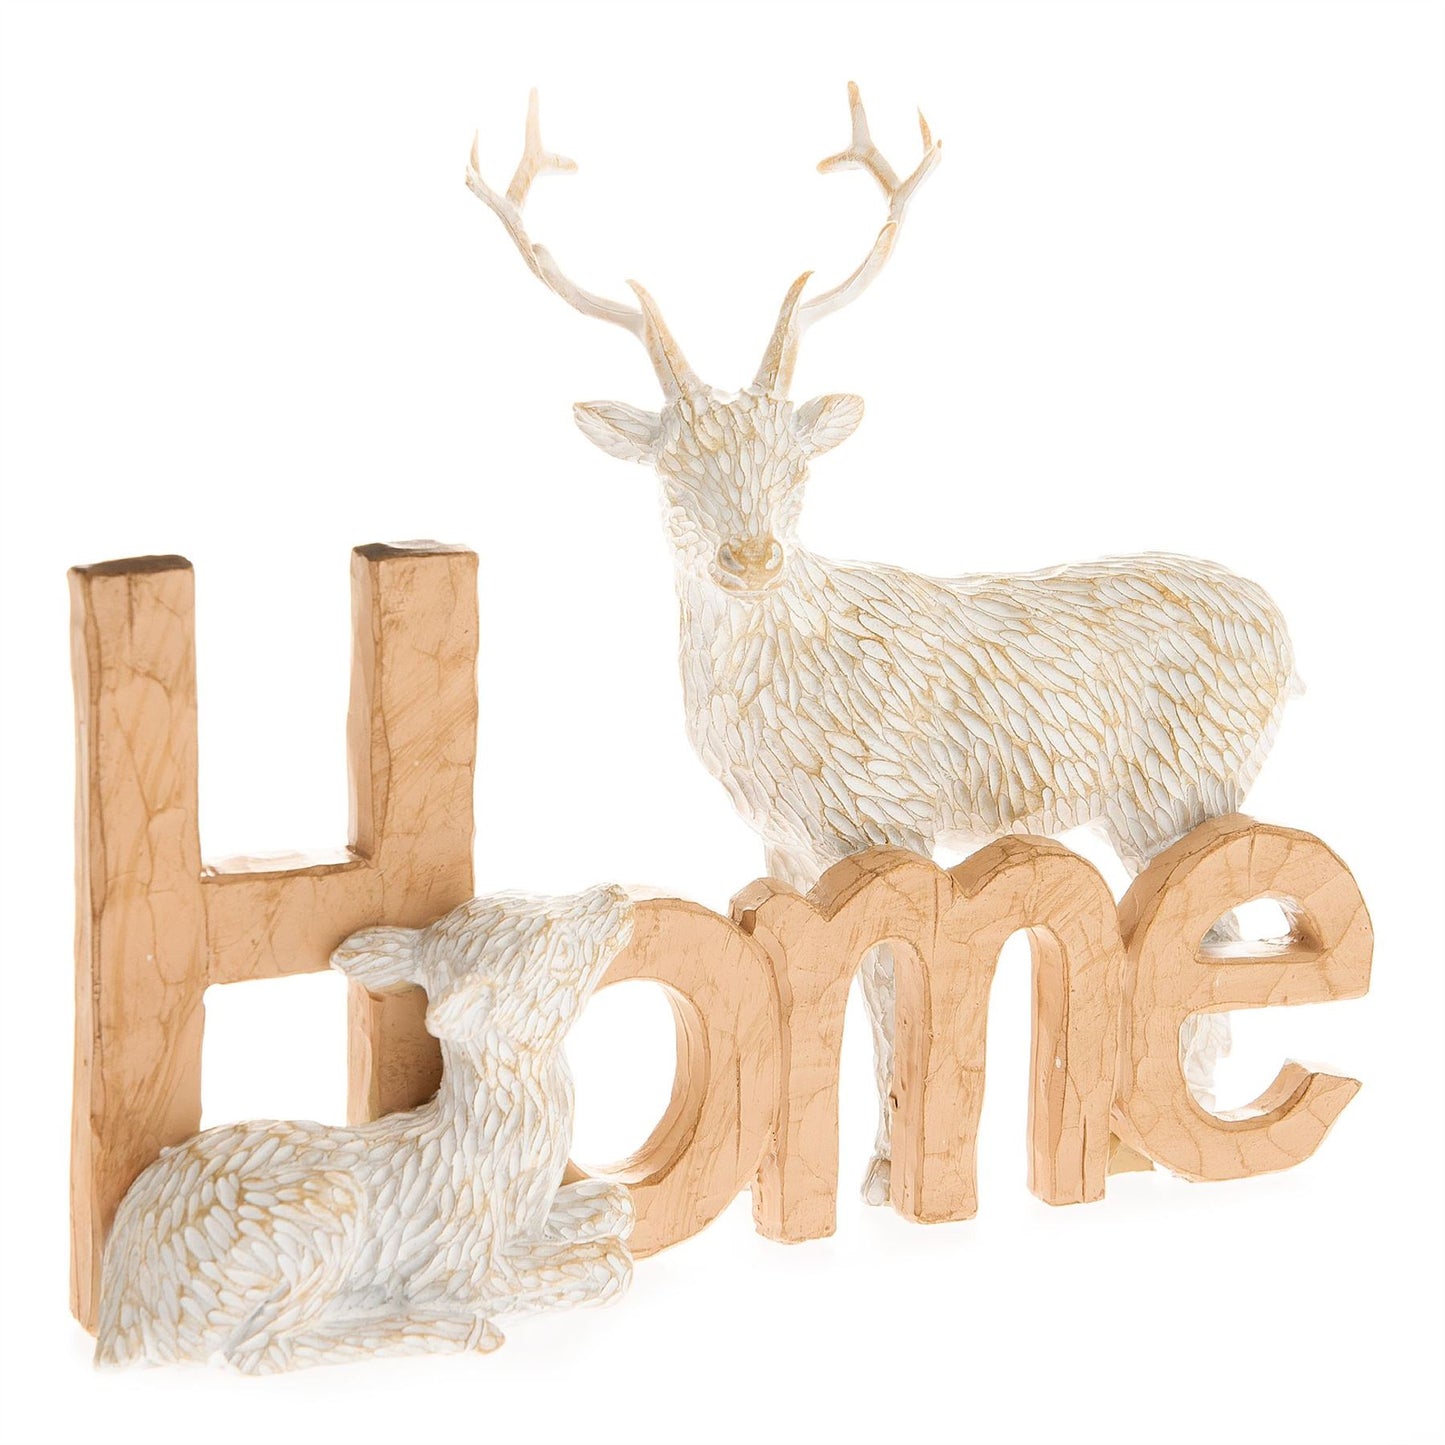 Hestia Wood Effect Resin Stag Ornament - Home